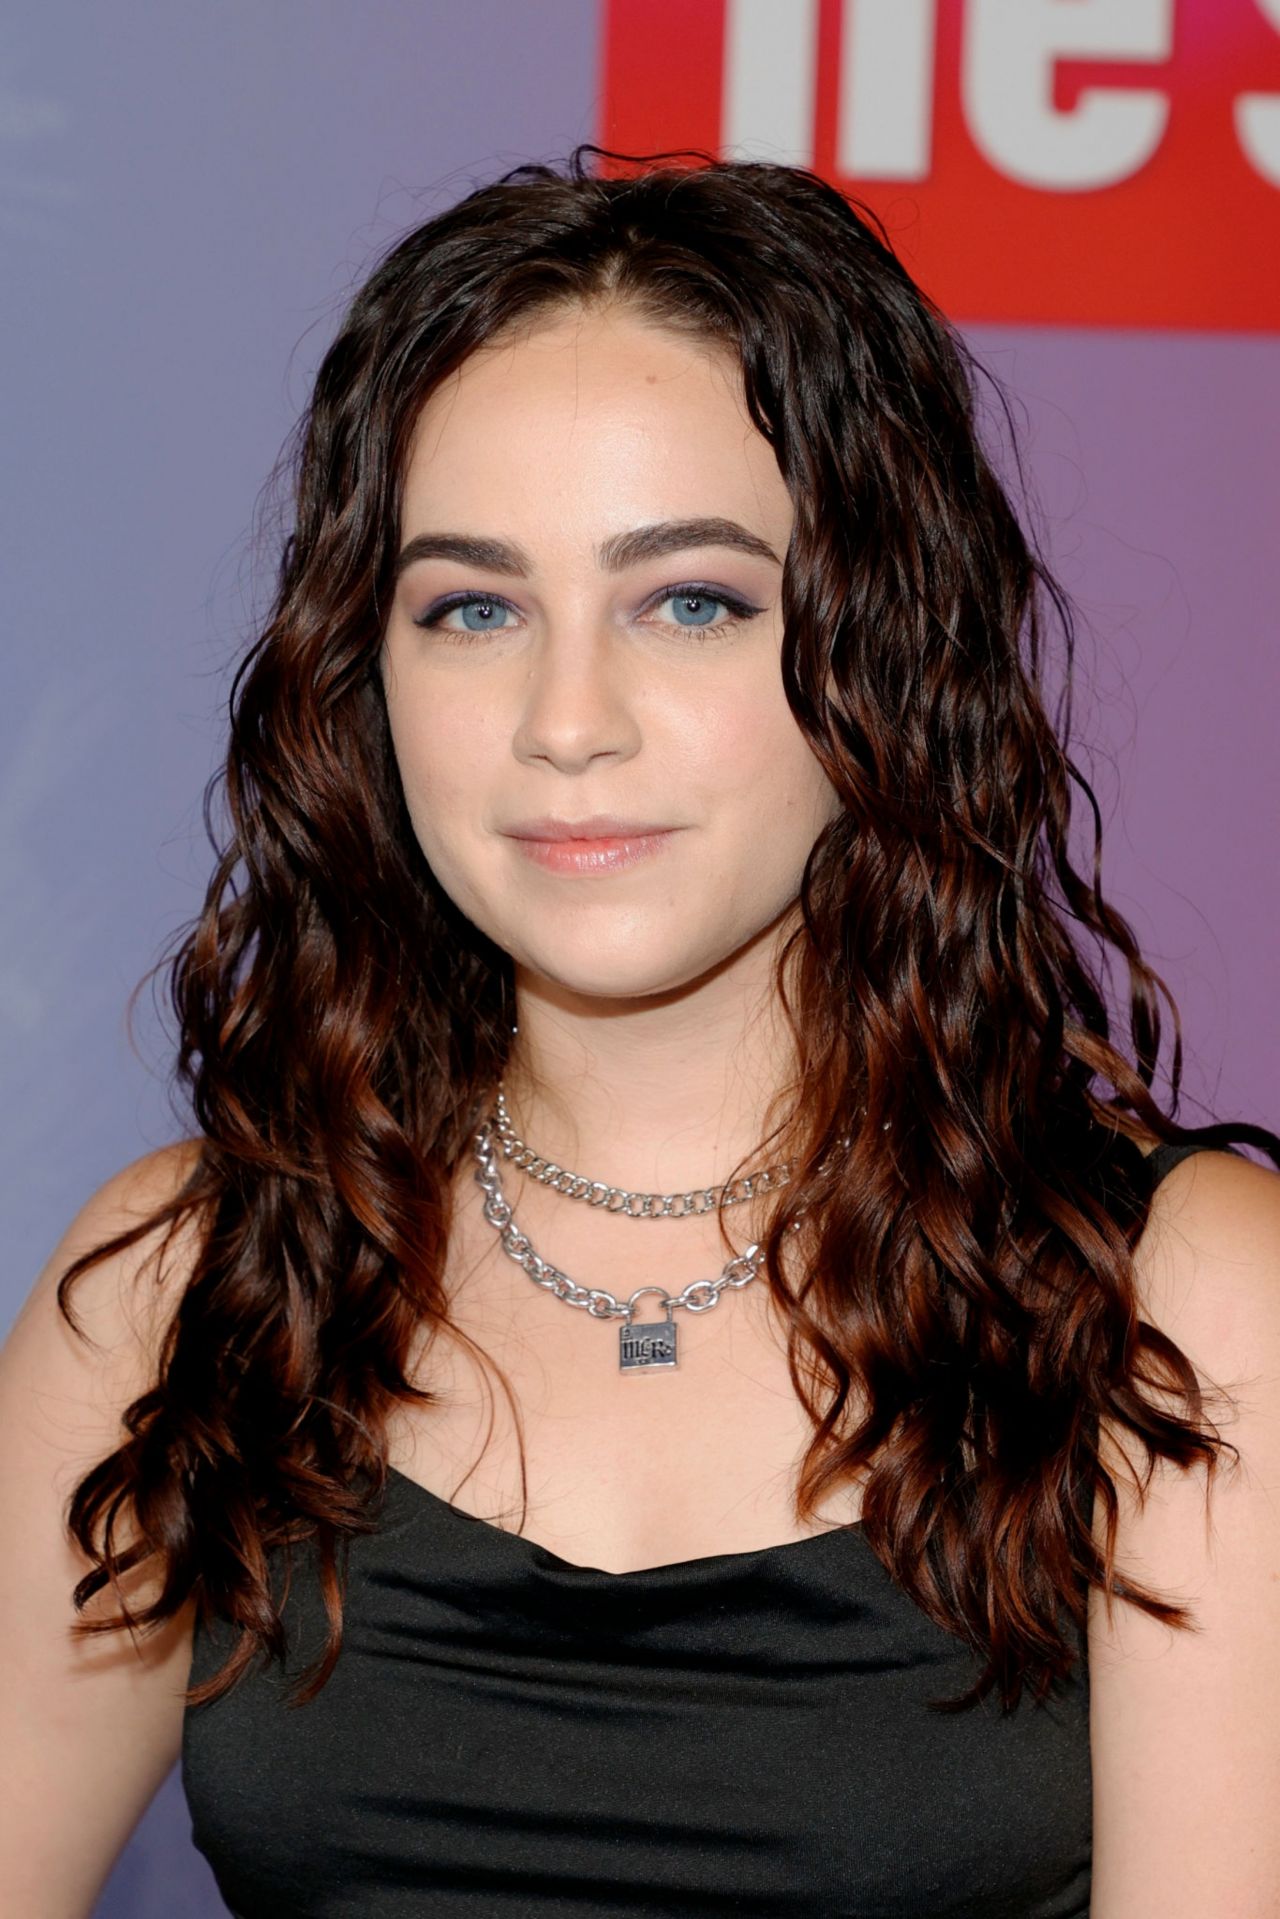 Mary Mouser - "He’s All That" Premiere in Hollywood.